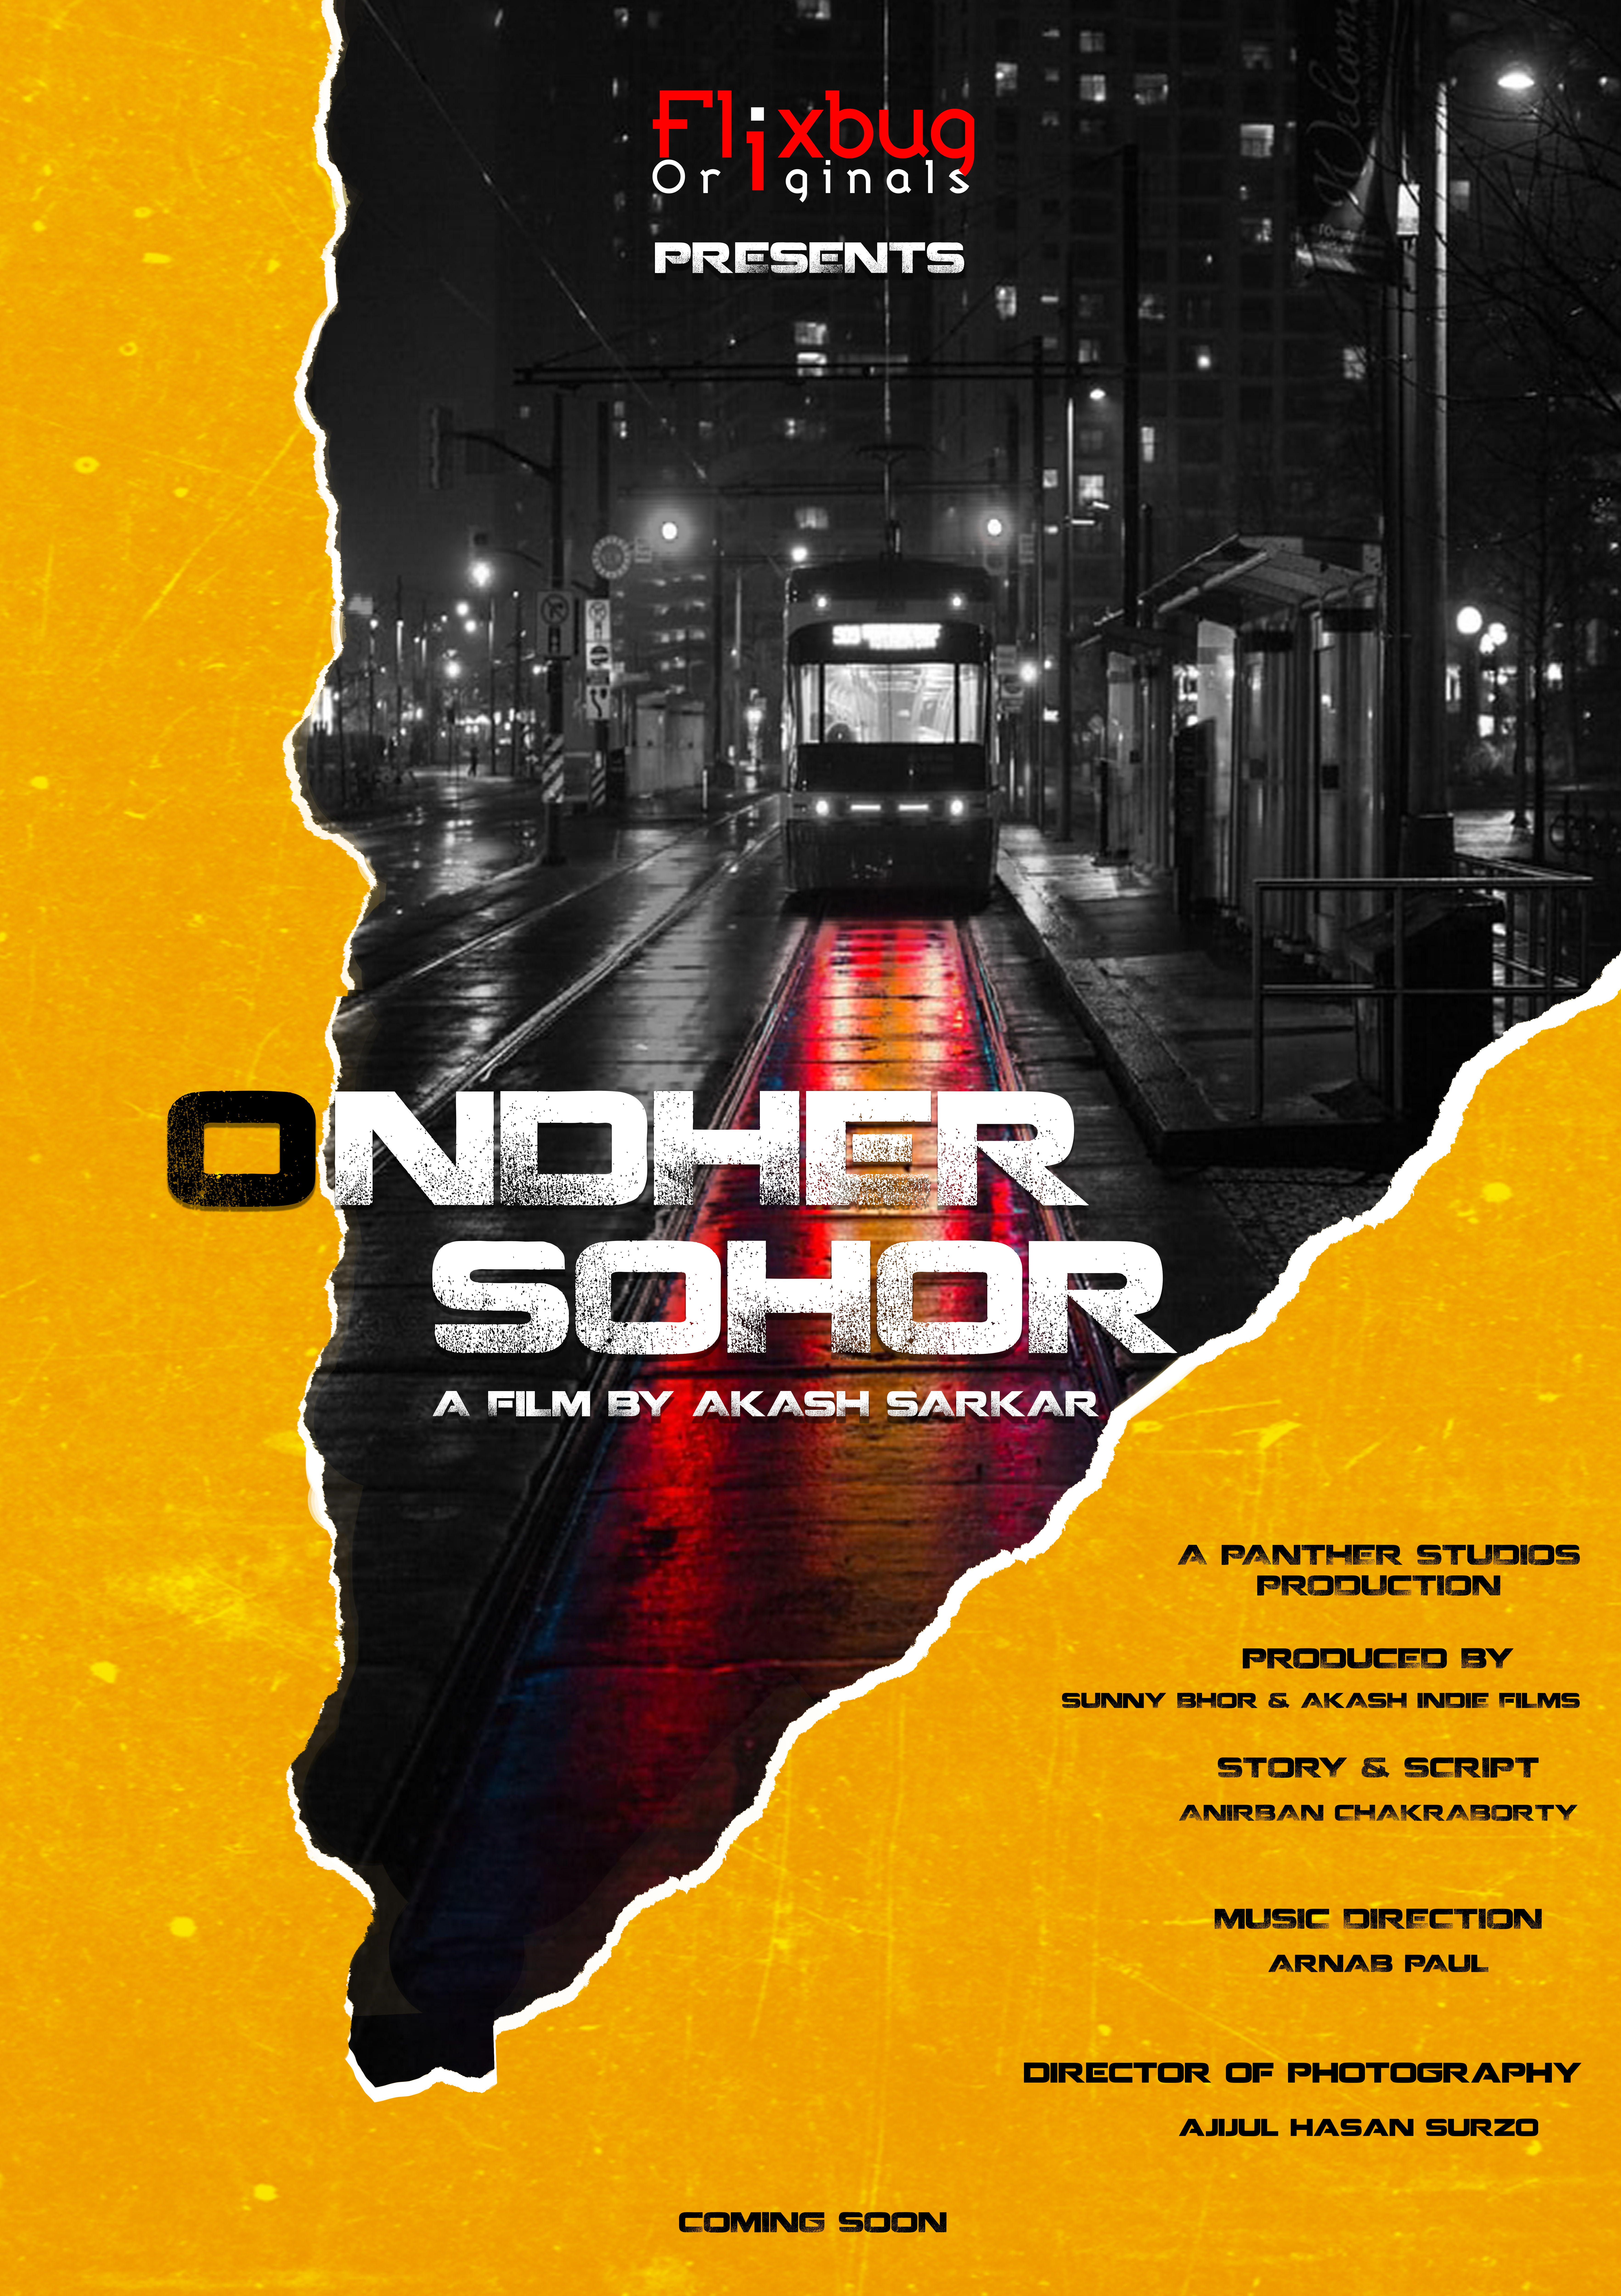 Ondher Sohor To Show How Pandemic Affected Kolkata; Film To Release On Flixbug